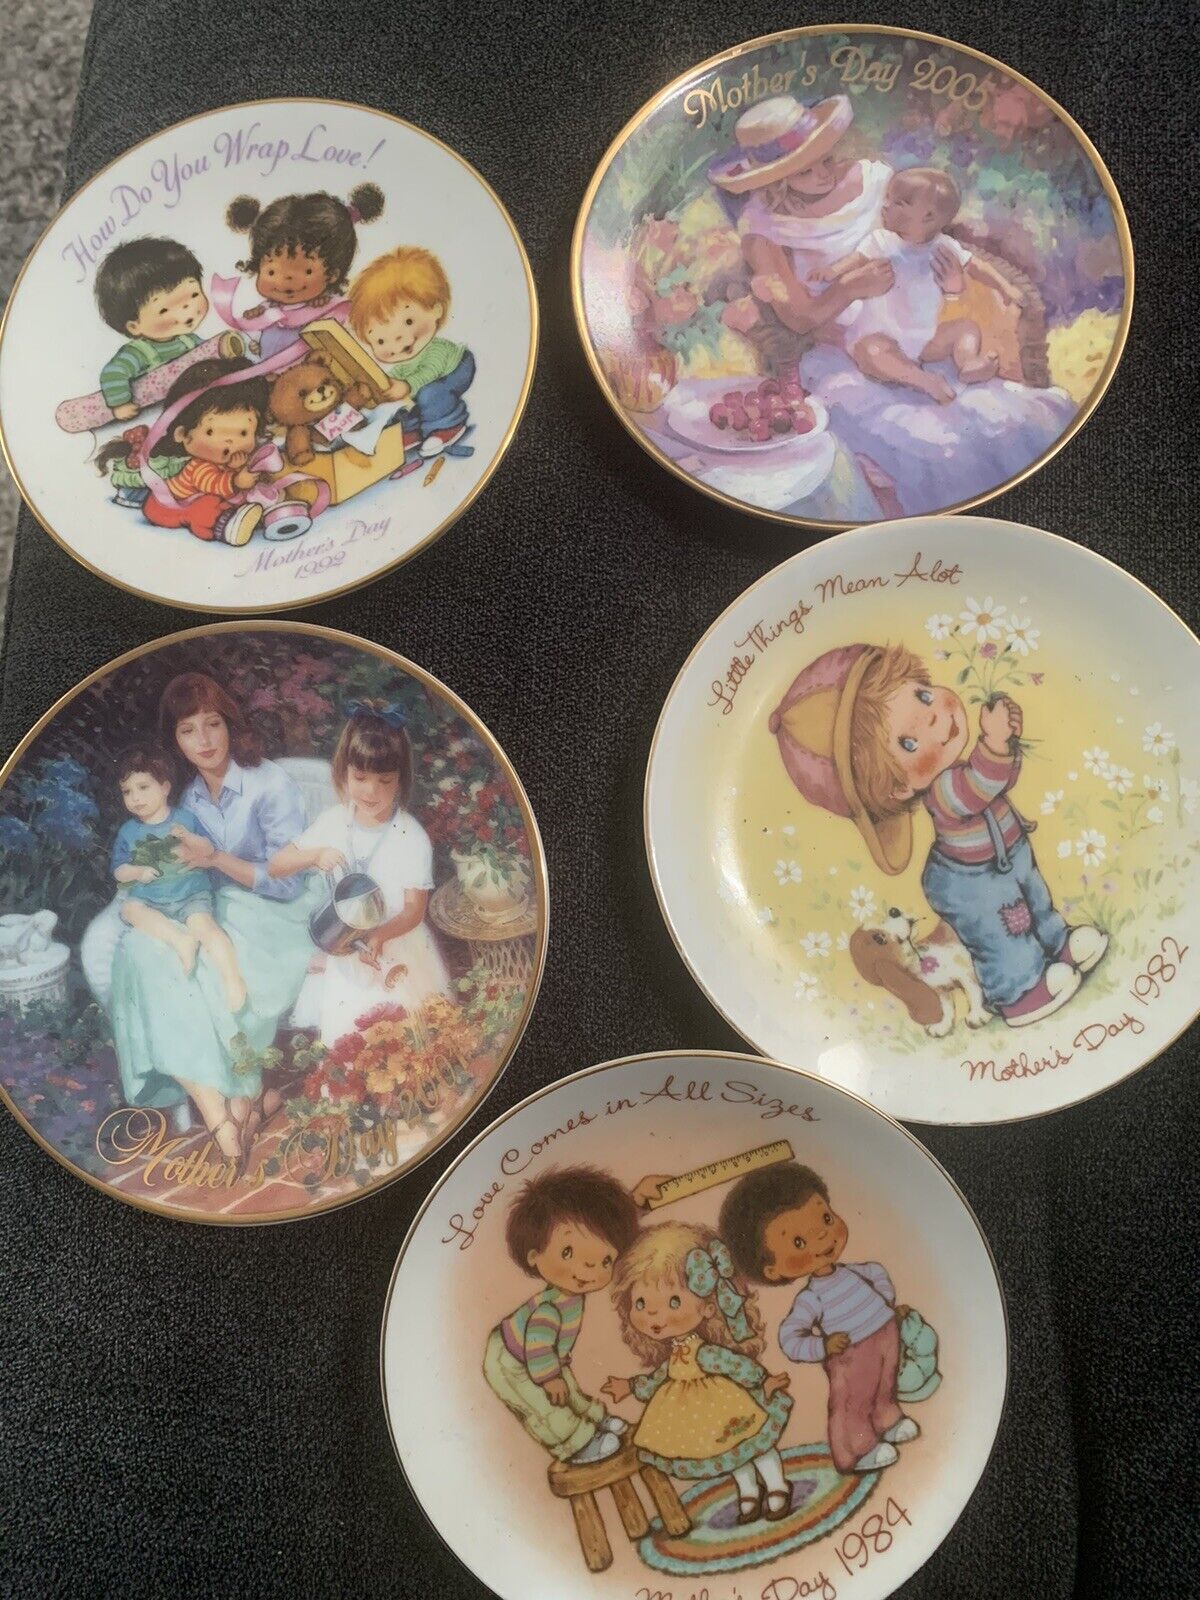 Lot Of 5 Vintage Avon Mothers Day Collectible Plates 5” Plates 80-90s-2001. Each